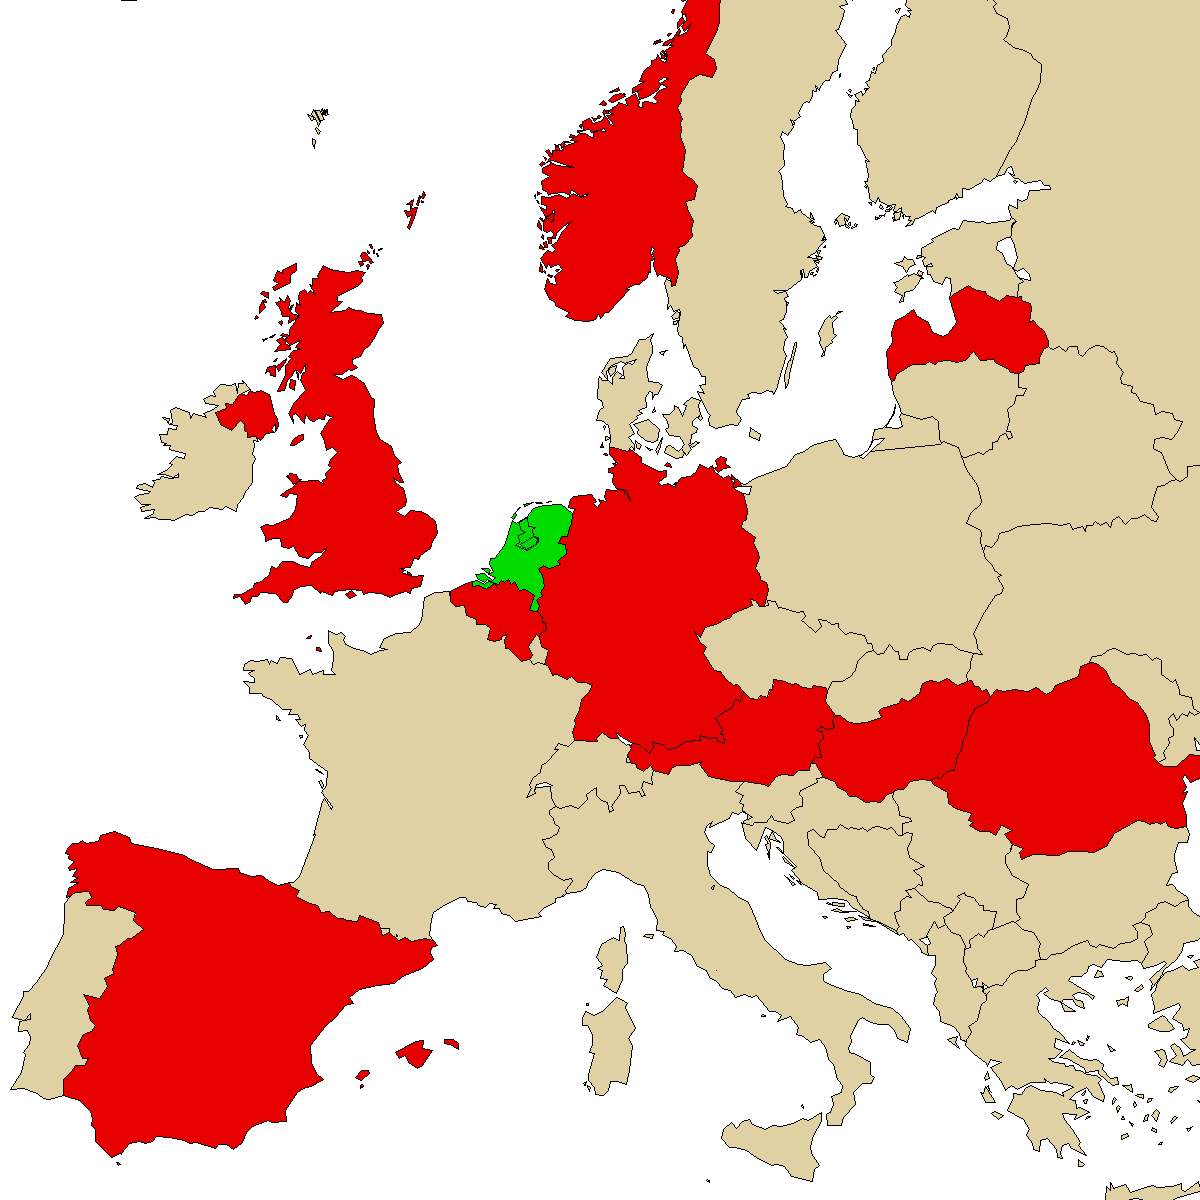 legal info map for our product 3FMA, green are countries with no ban, red with ban, grey is unknown